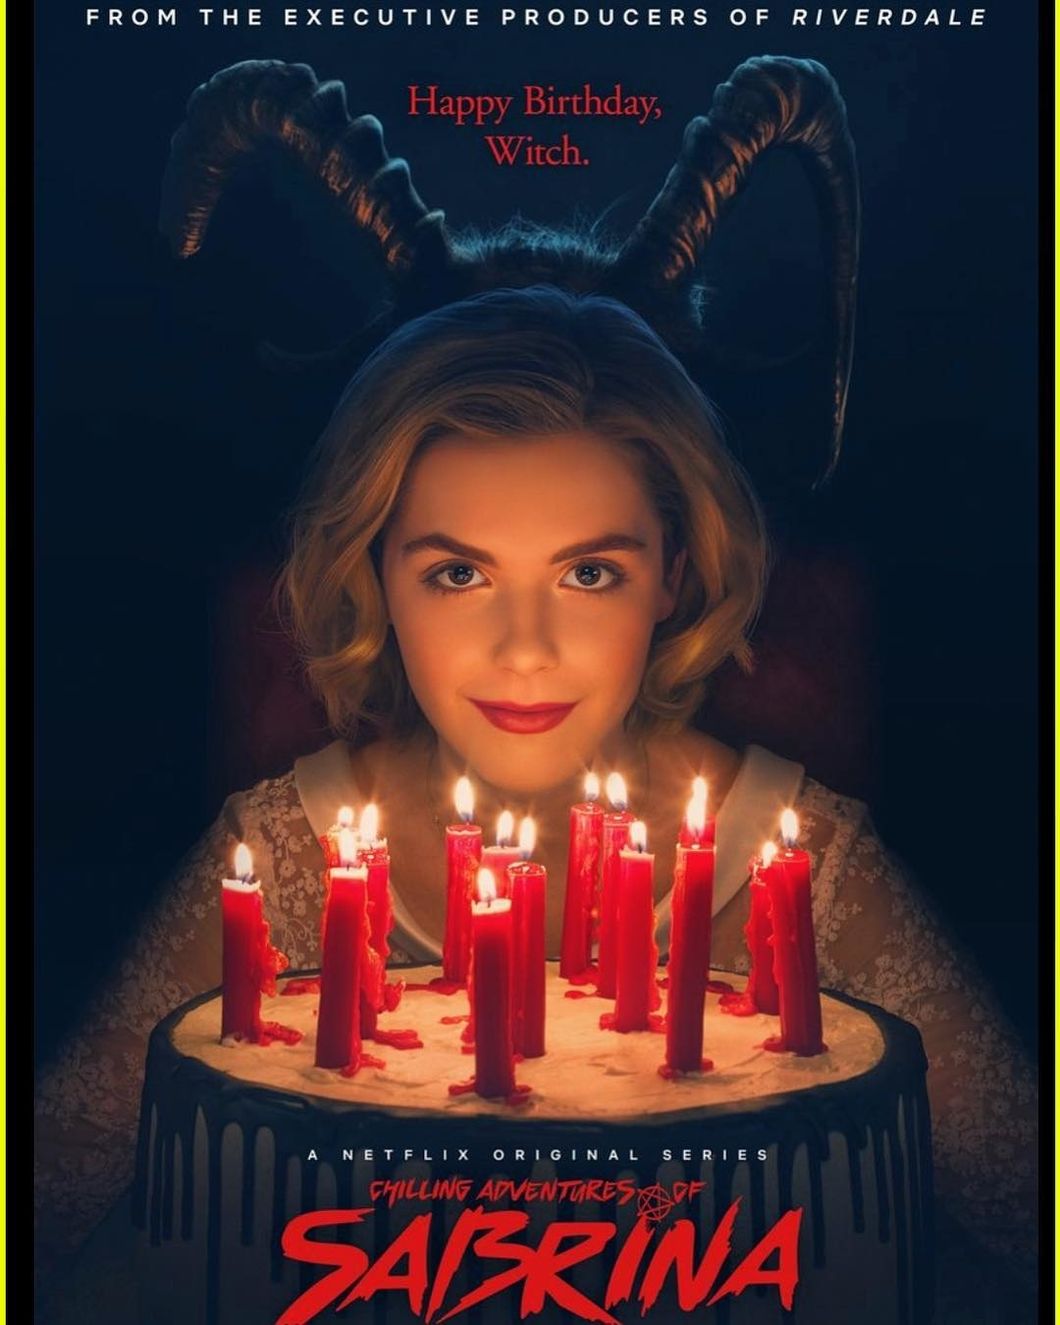 7 Expectations And Demands I Have For Netflix's New Series, 'Chilling Adventures Of Sabrina'